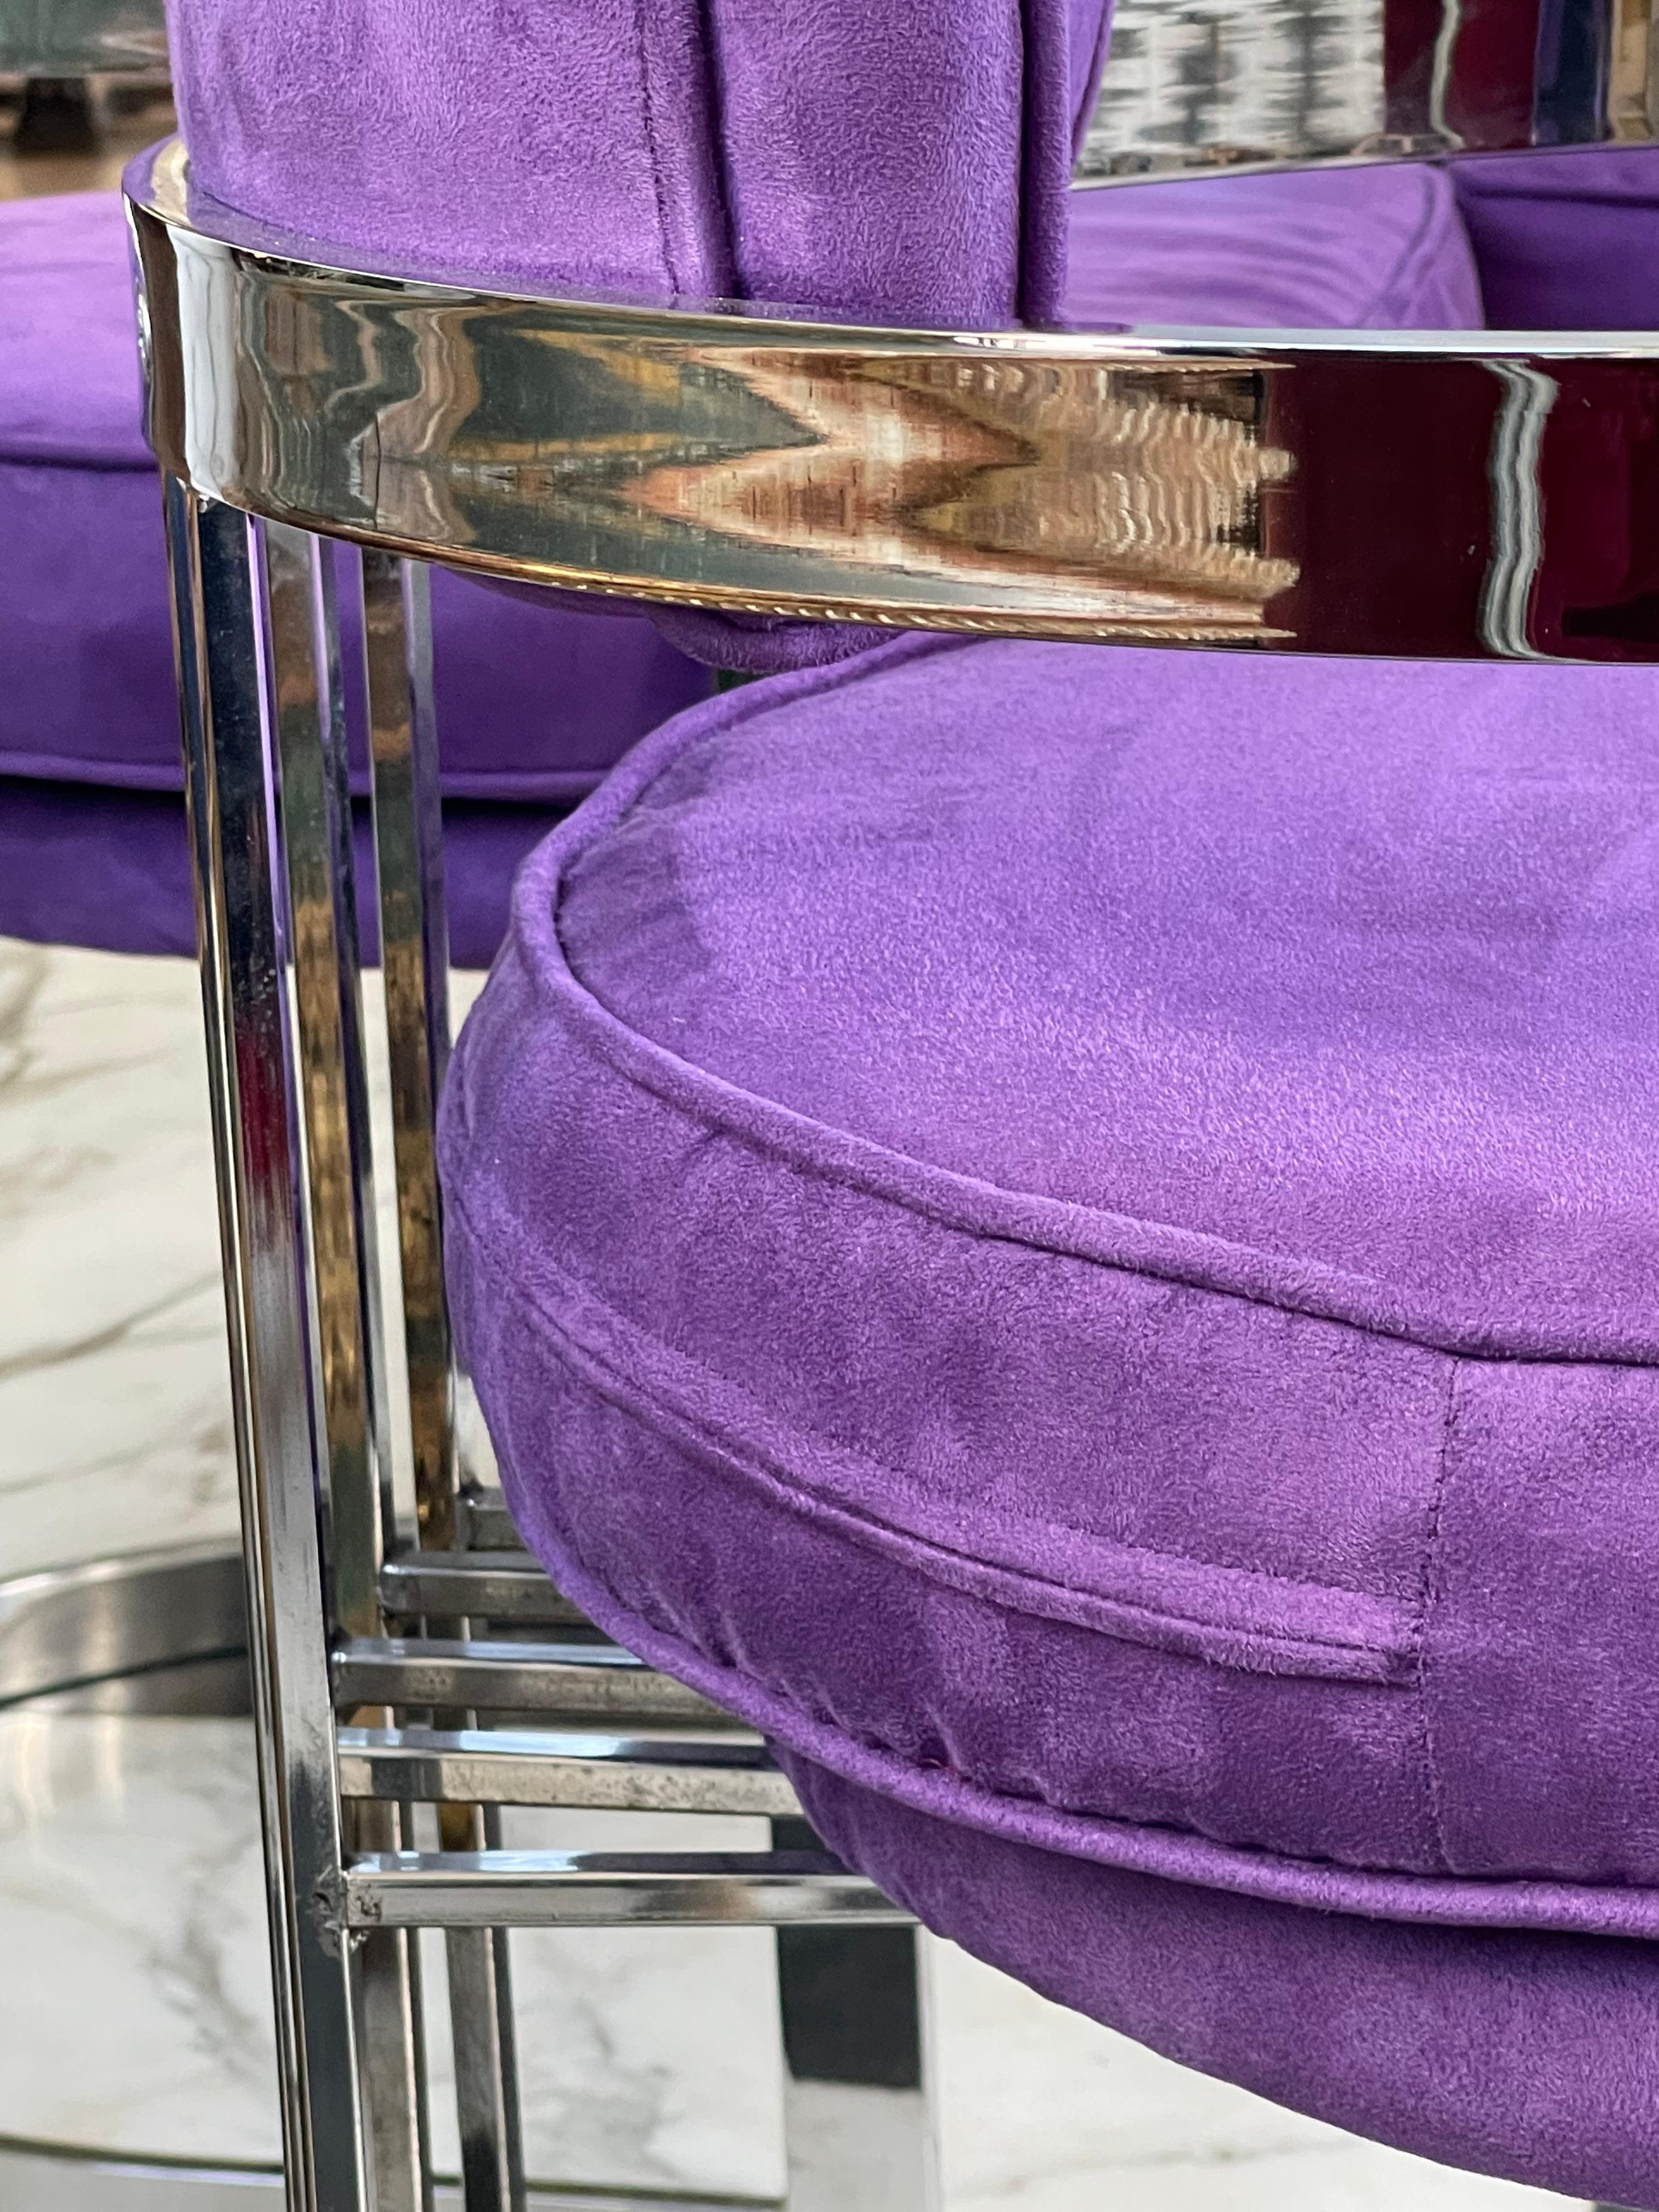 4 Milo Baughman Chrome Chairs in Purple Upholstery  For Sale 2